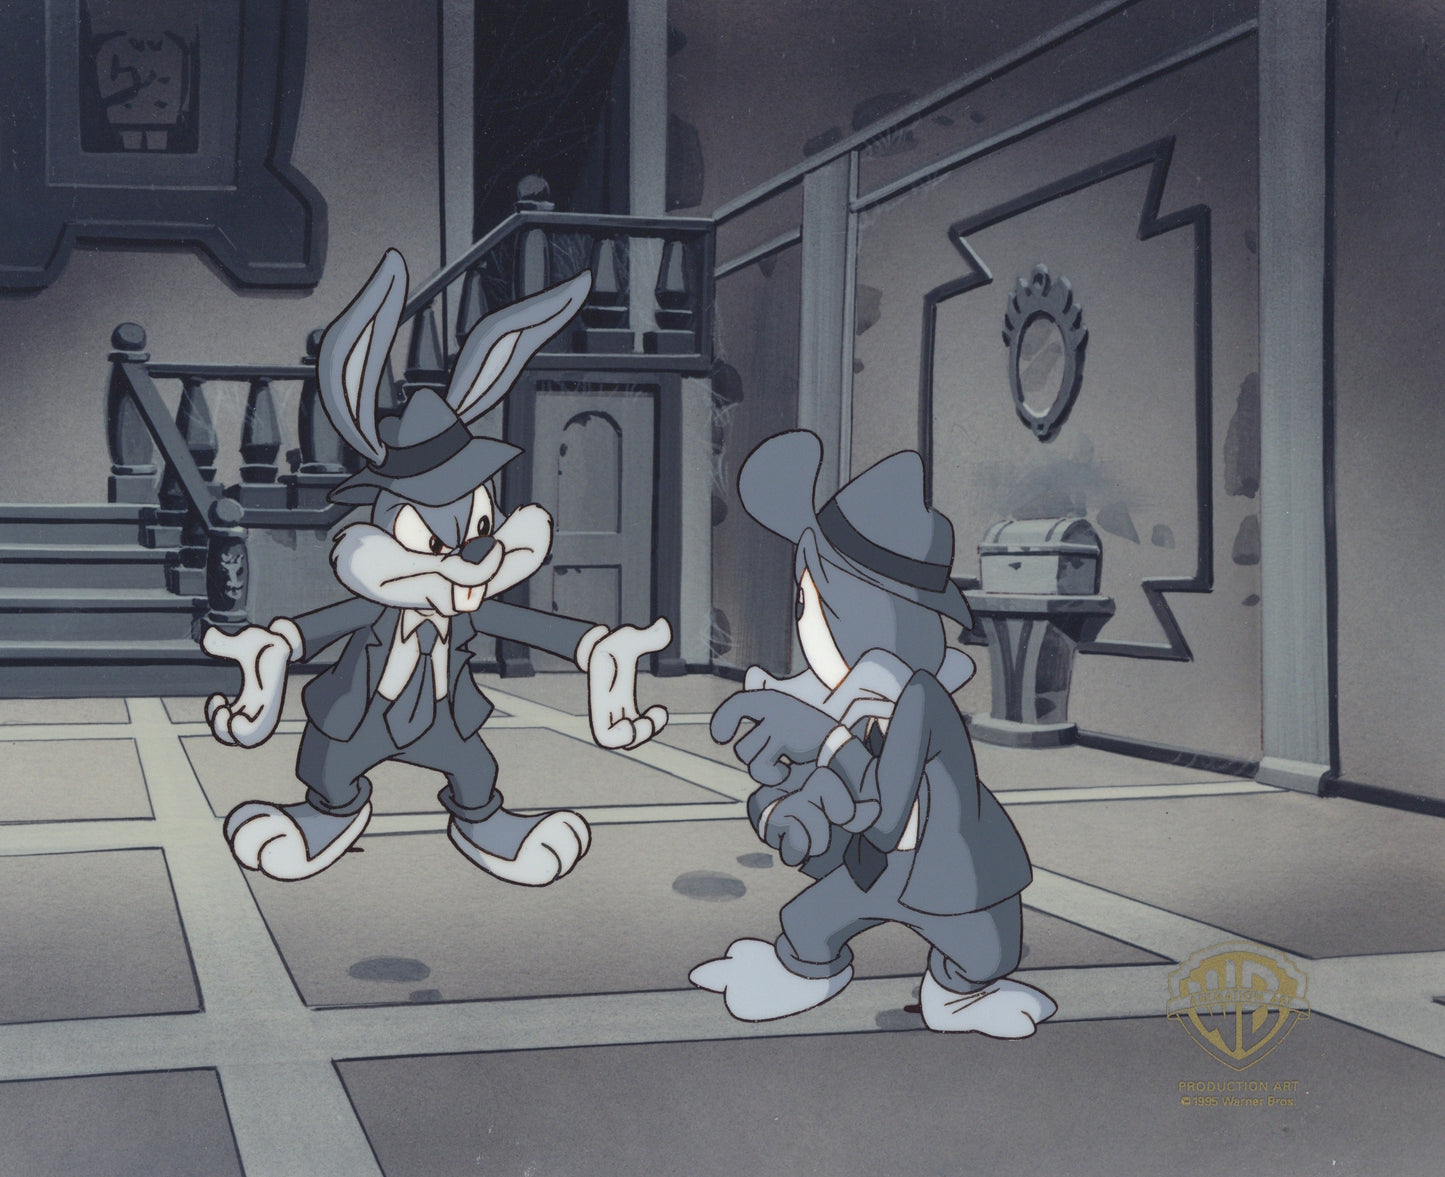 Tiny Toons Original Production Cel: Buster and Plucky